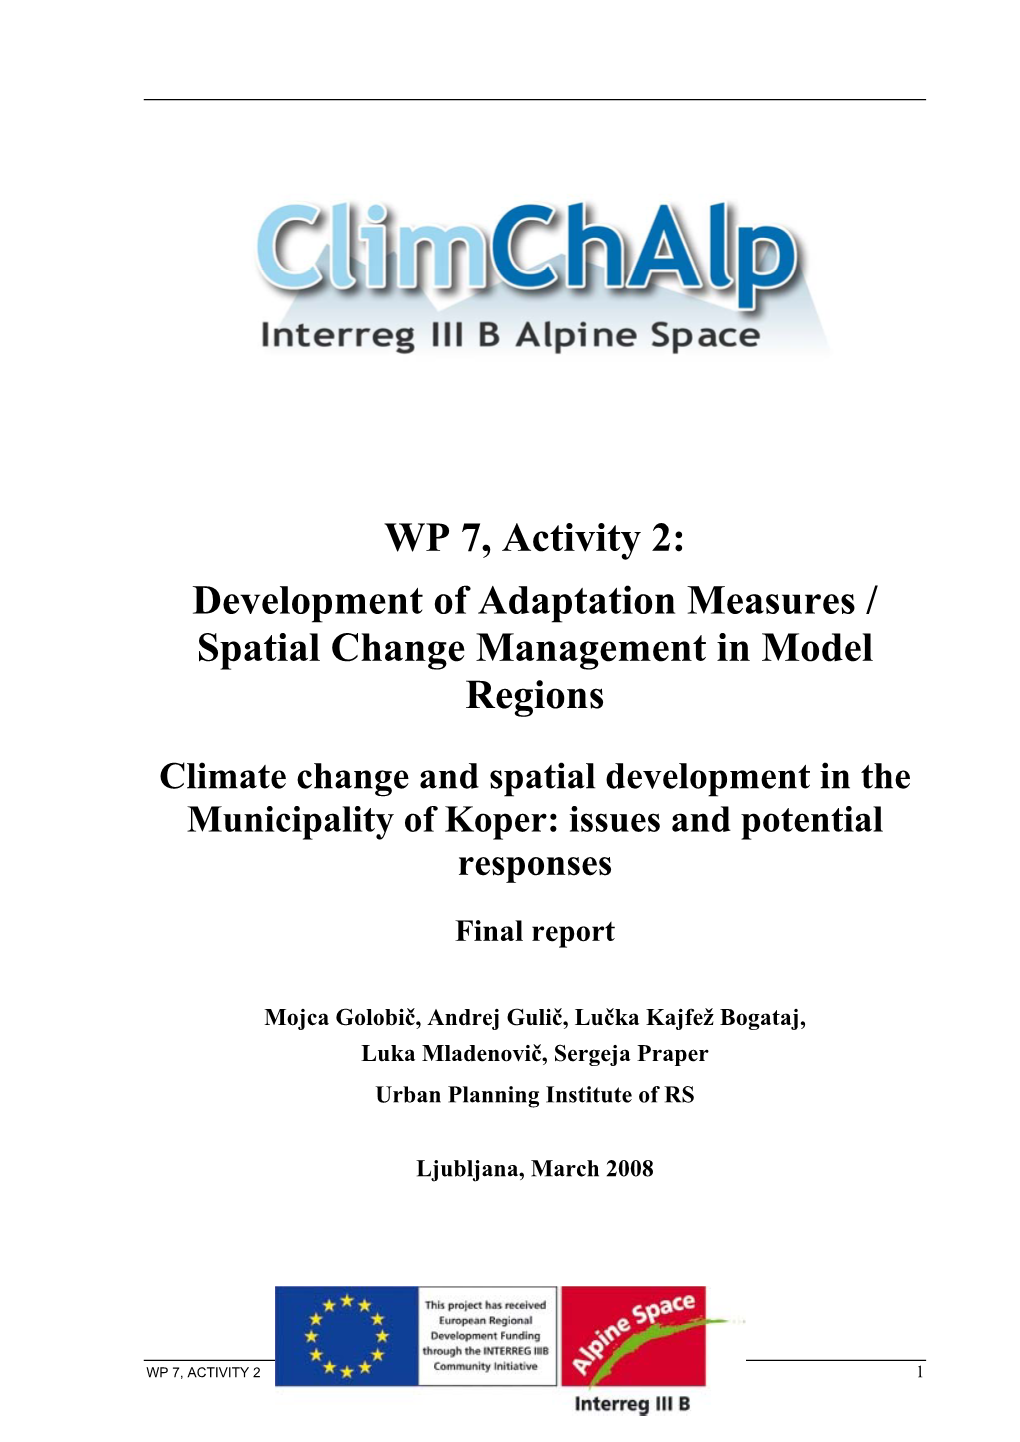 WP 7, Activity 2: Development of Adaptation Measures / Spatial Change Management in Model Regions